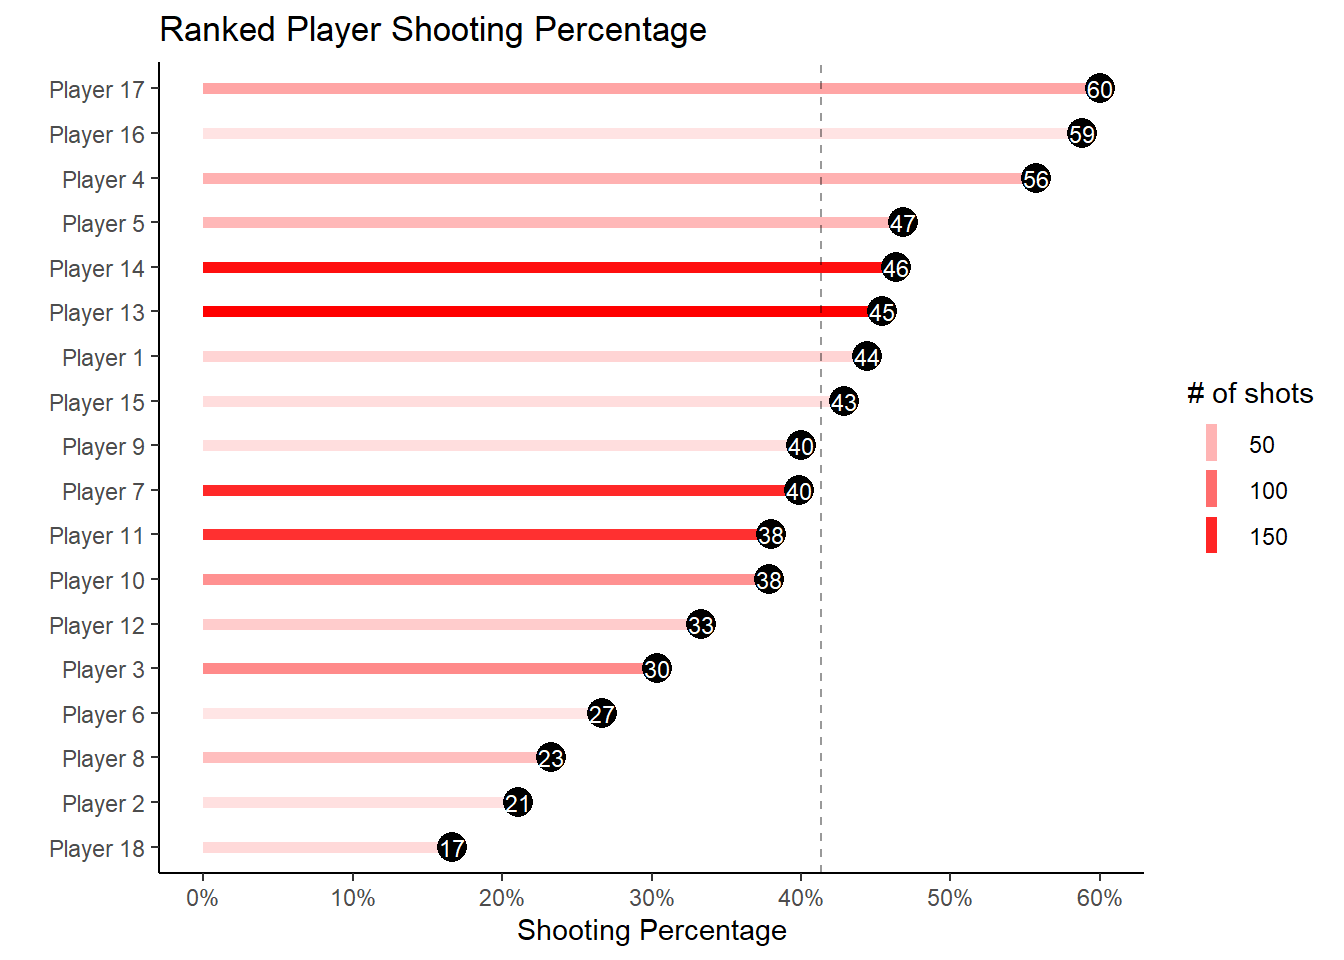 How the player affects shooting percentage